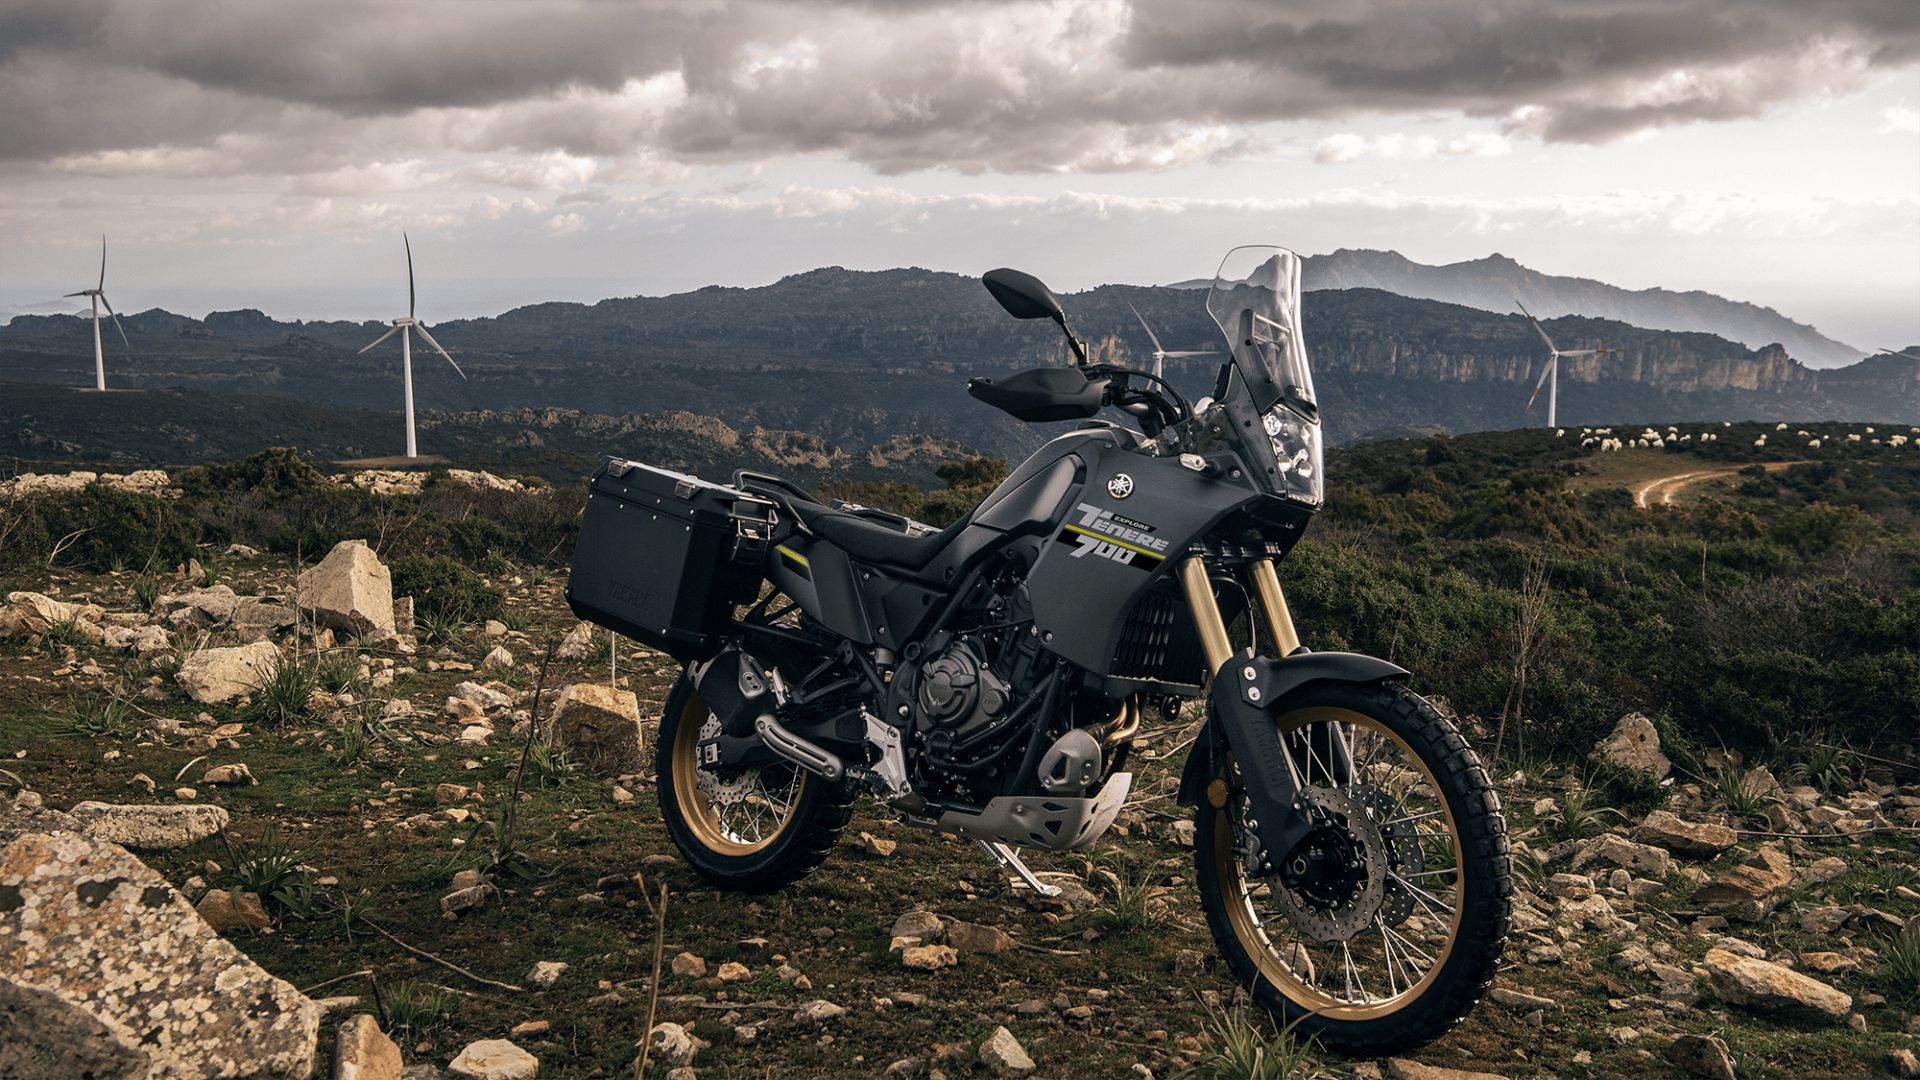 The Ténéré 700 Explore – Ready to discover something new?